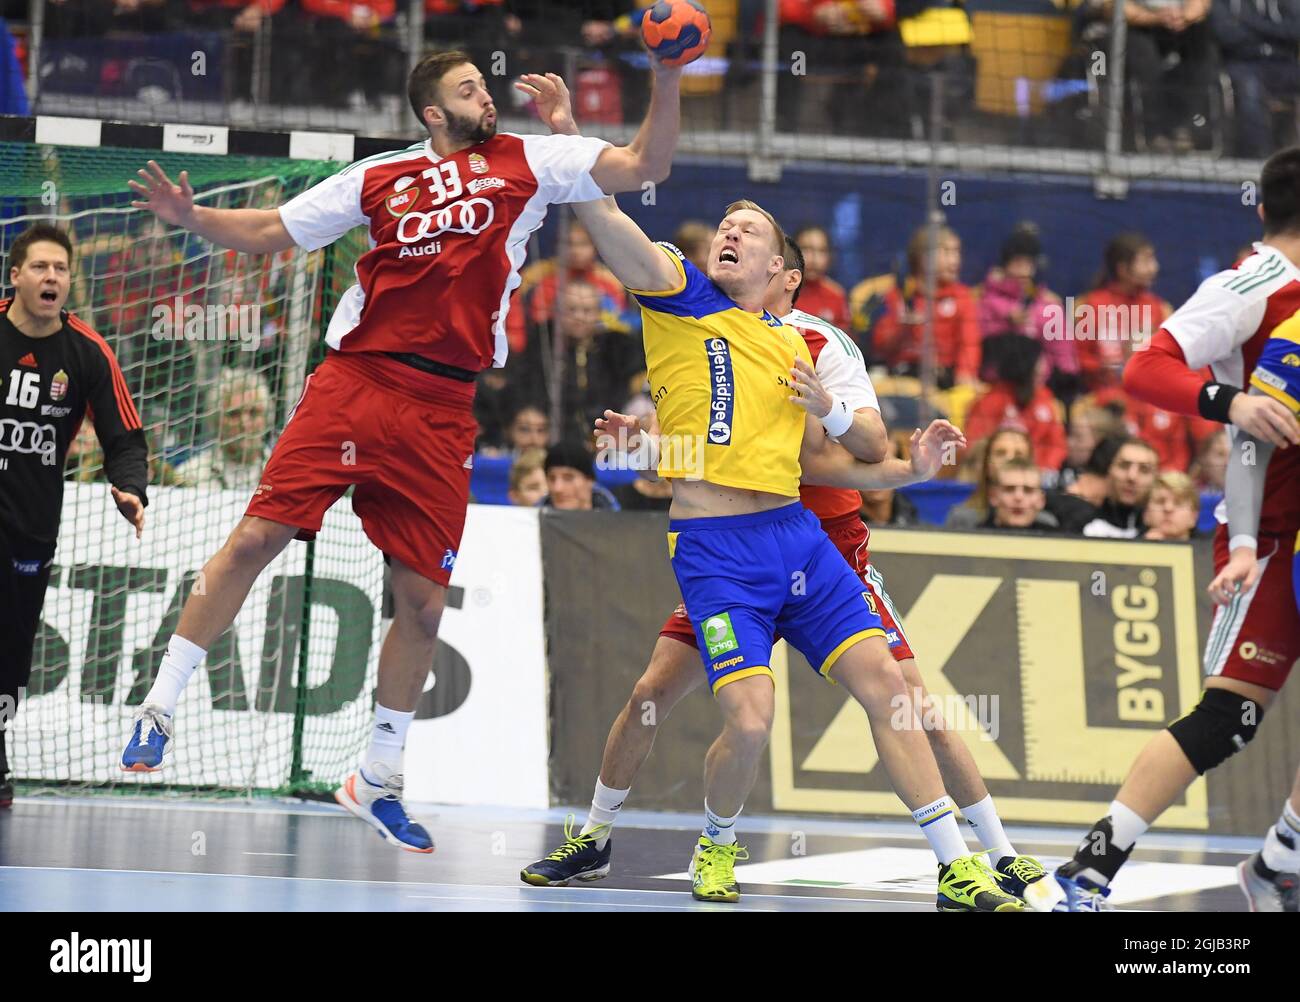 tvivl kamera teknisk Hungary's Gabor Ancsin and Sweden's Fredric Pettersson during a friendly  hanball game between Sweden and Hungary at Kinnarp Arena, Jonkoping, Sweden  Jan 06, 2018 Photo: Mikael Fritzon / TT / kod 62360 Stock Photo - Alamy